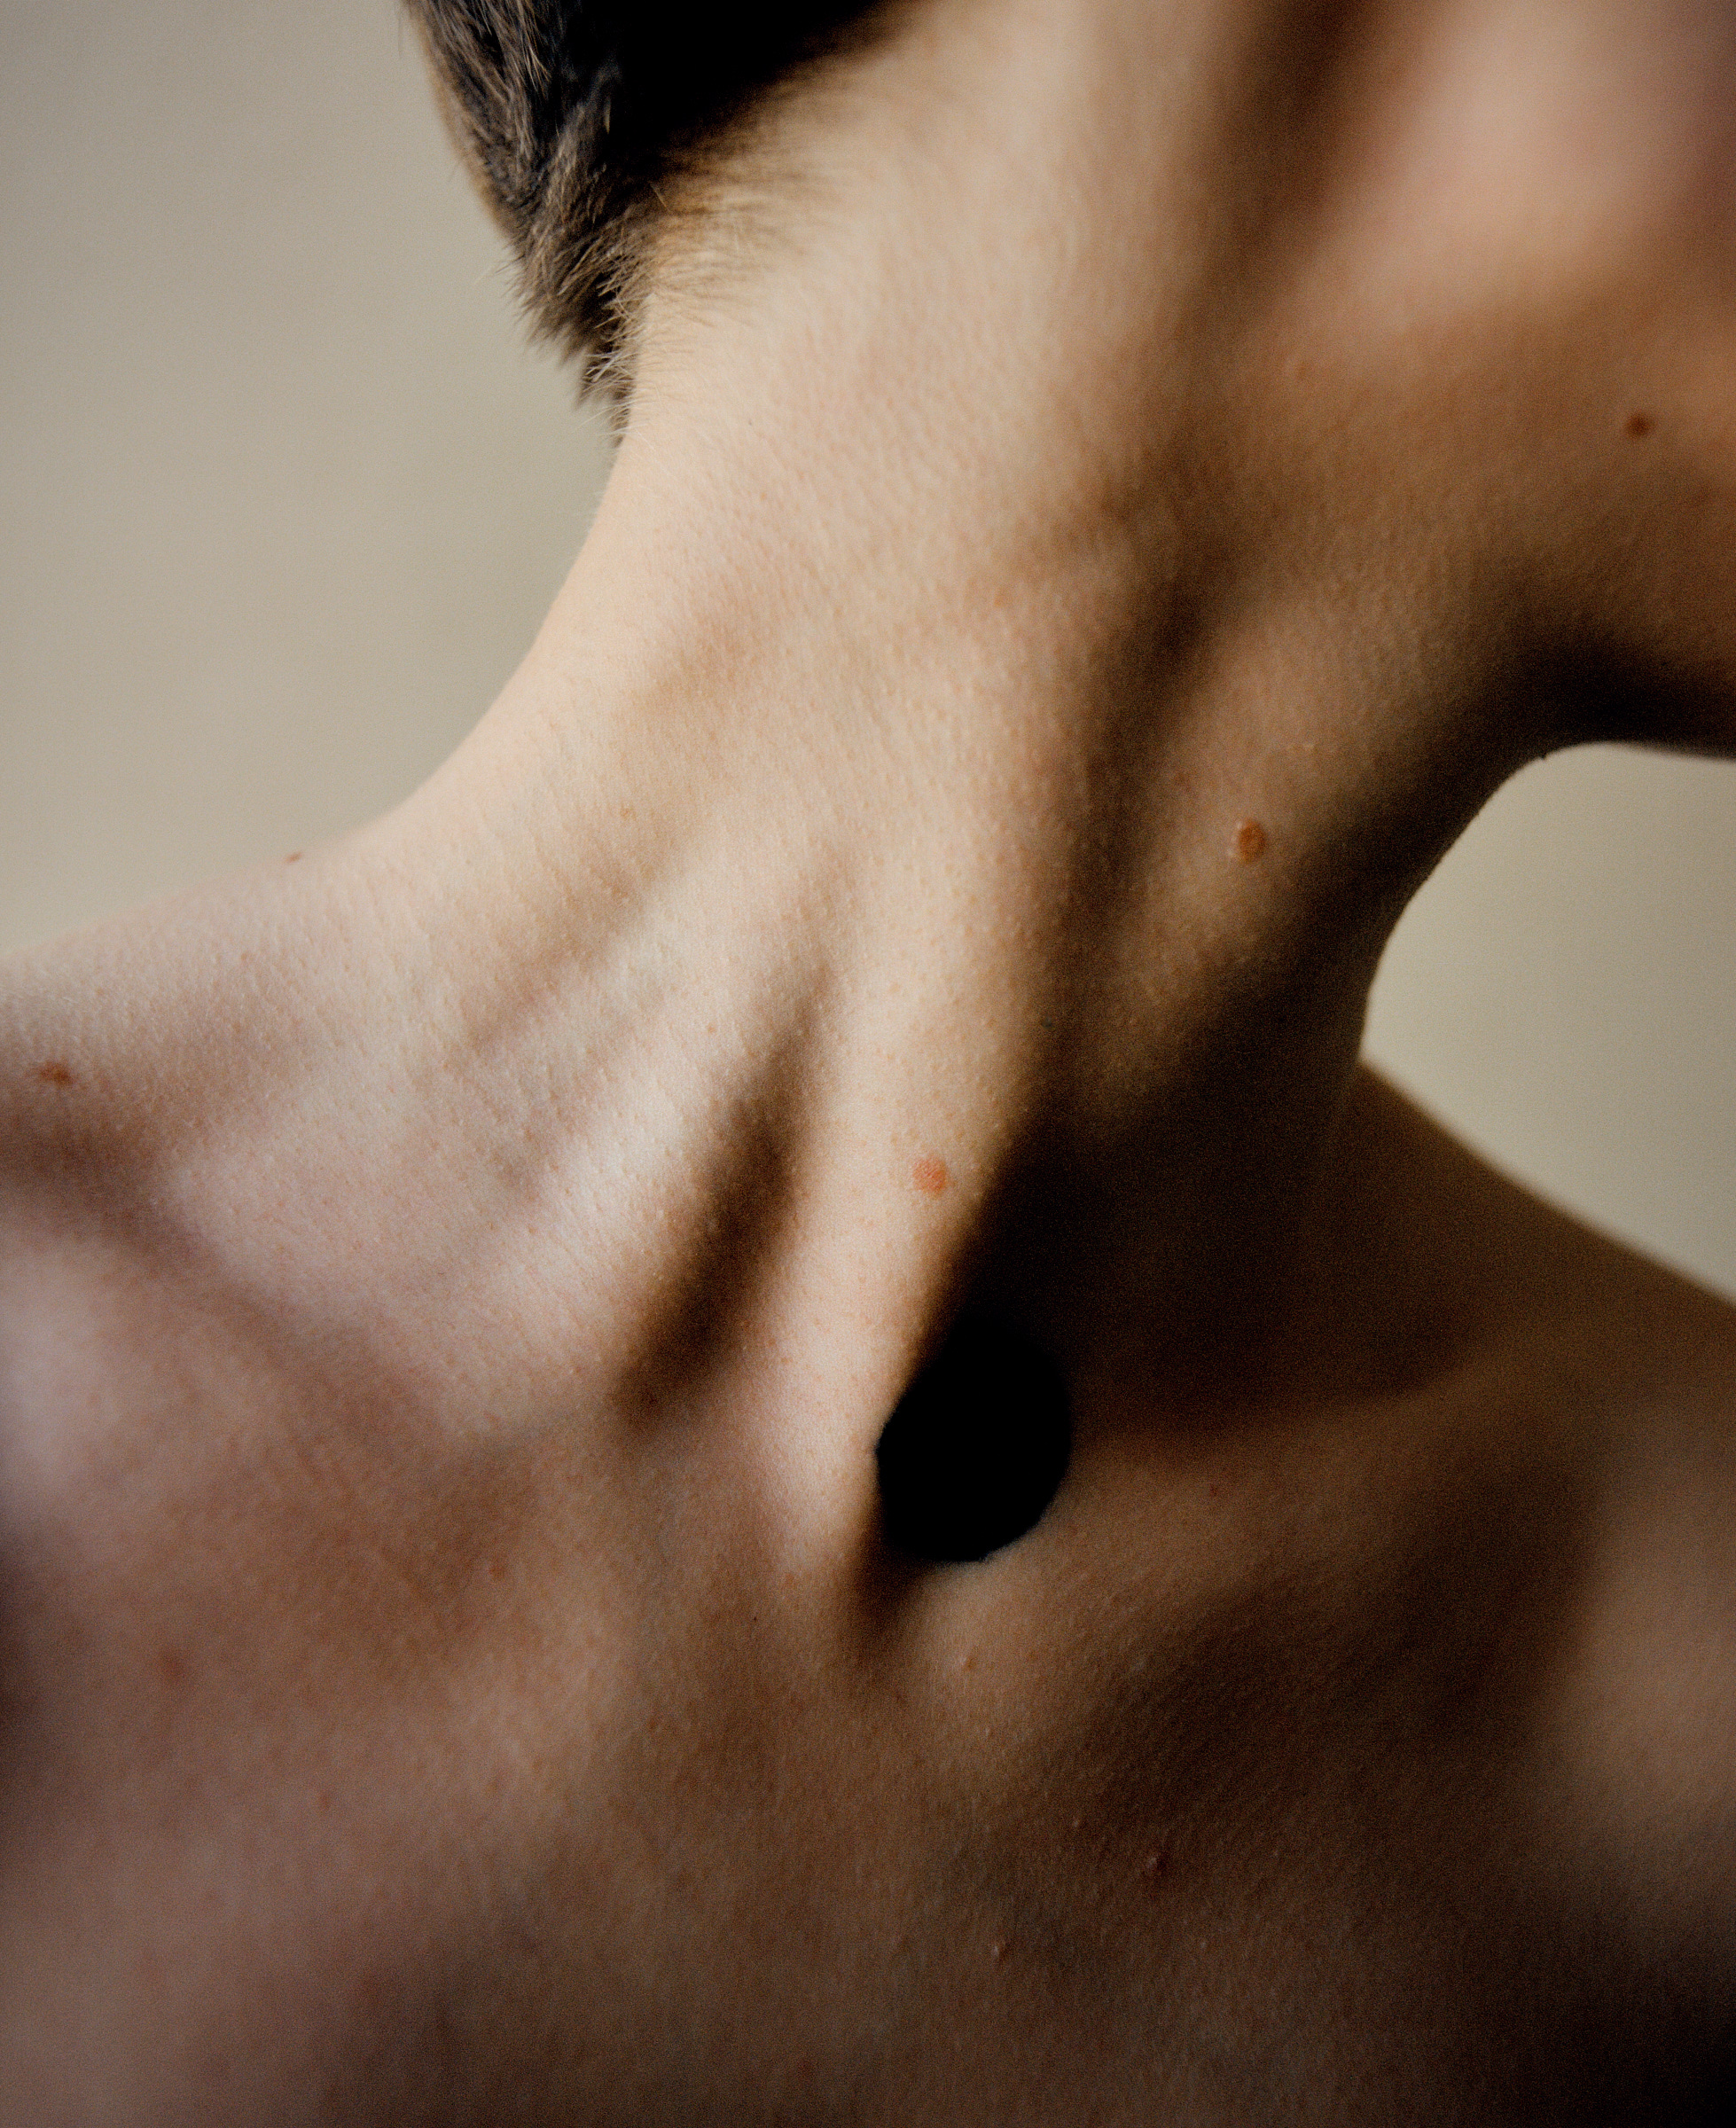  SKIN | An exploration of the surface we call home  